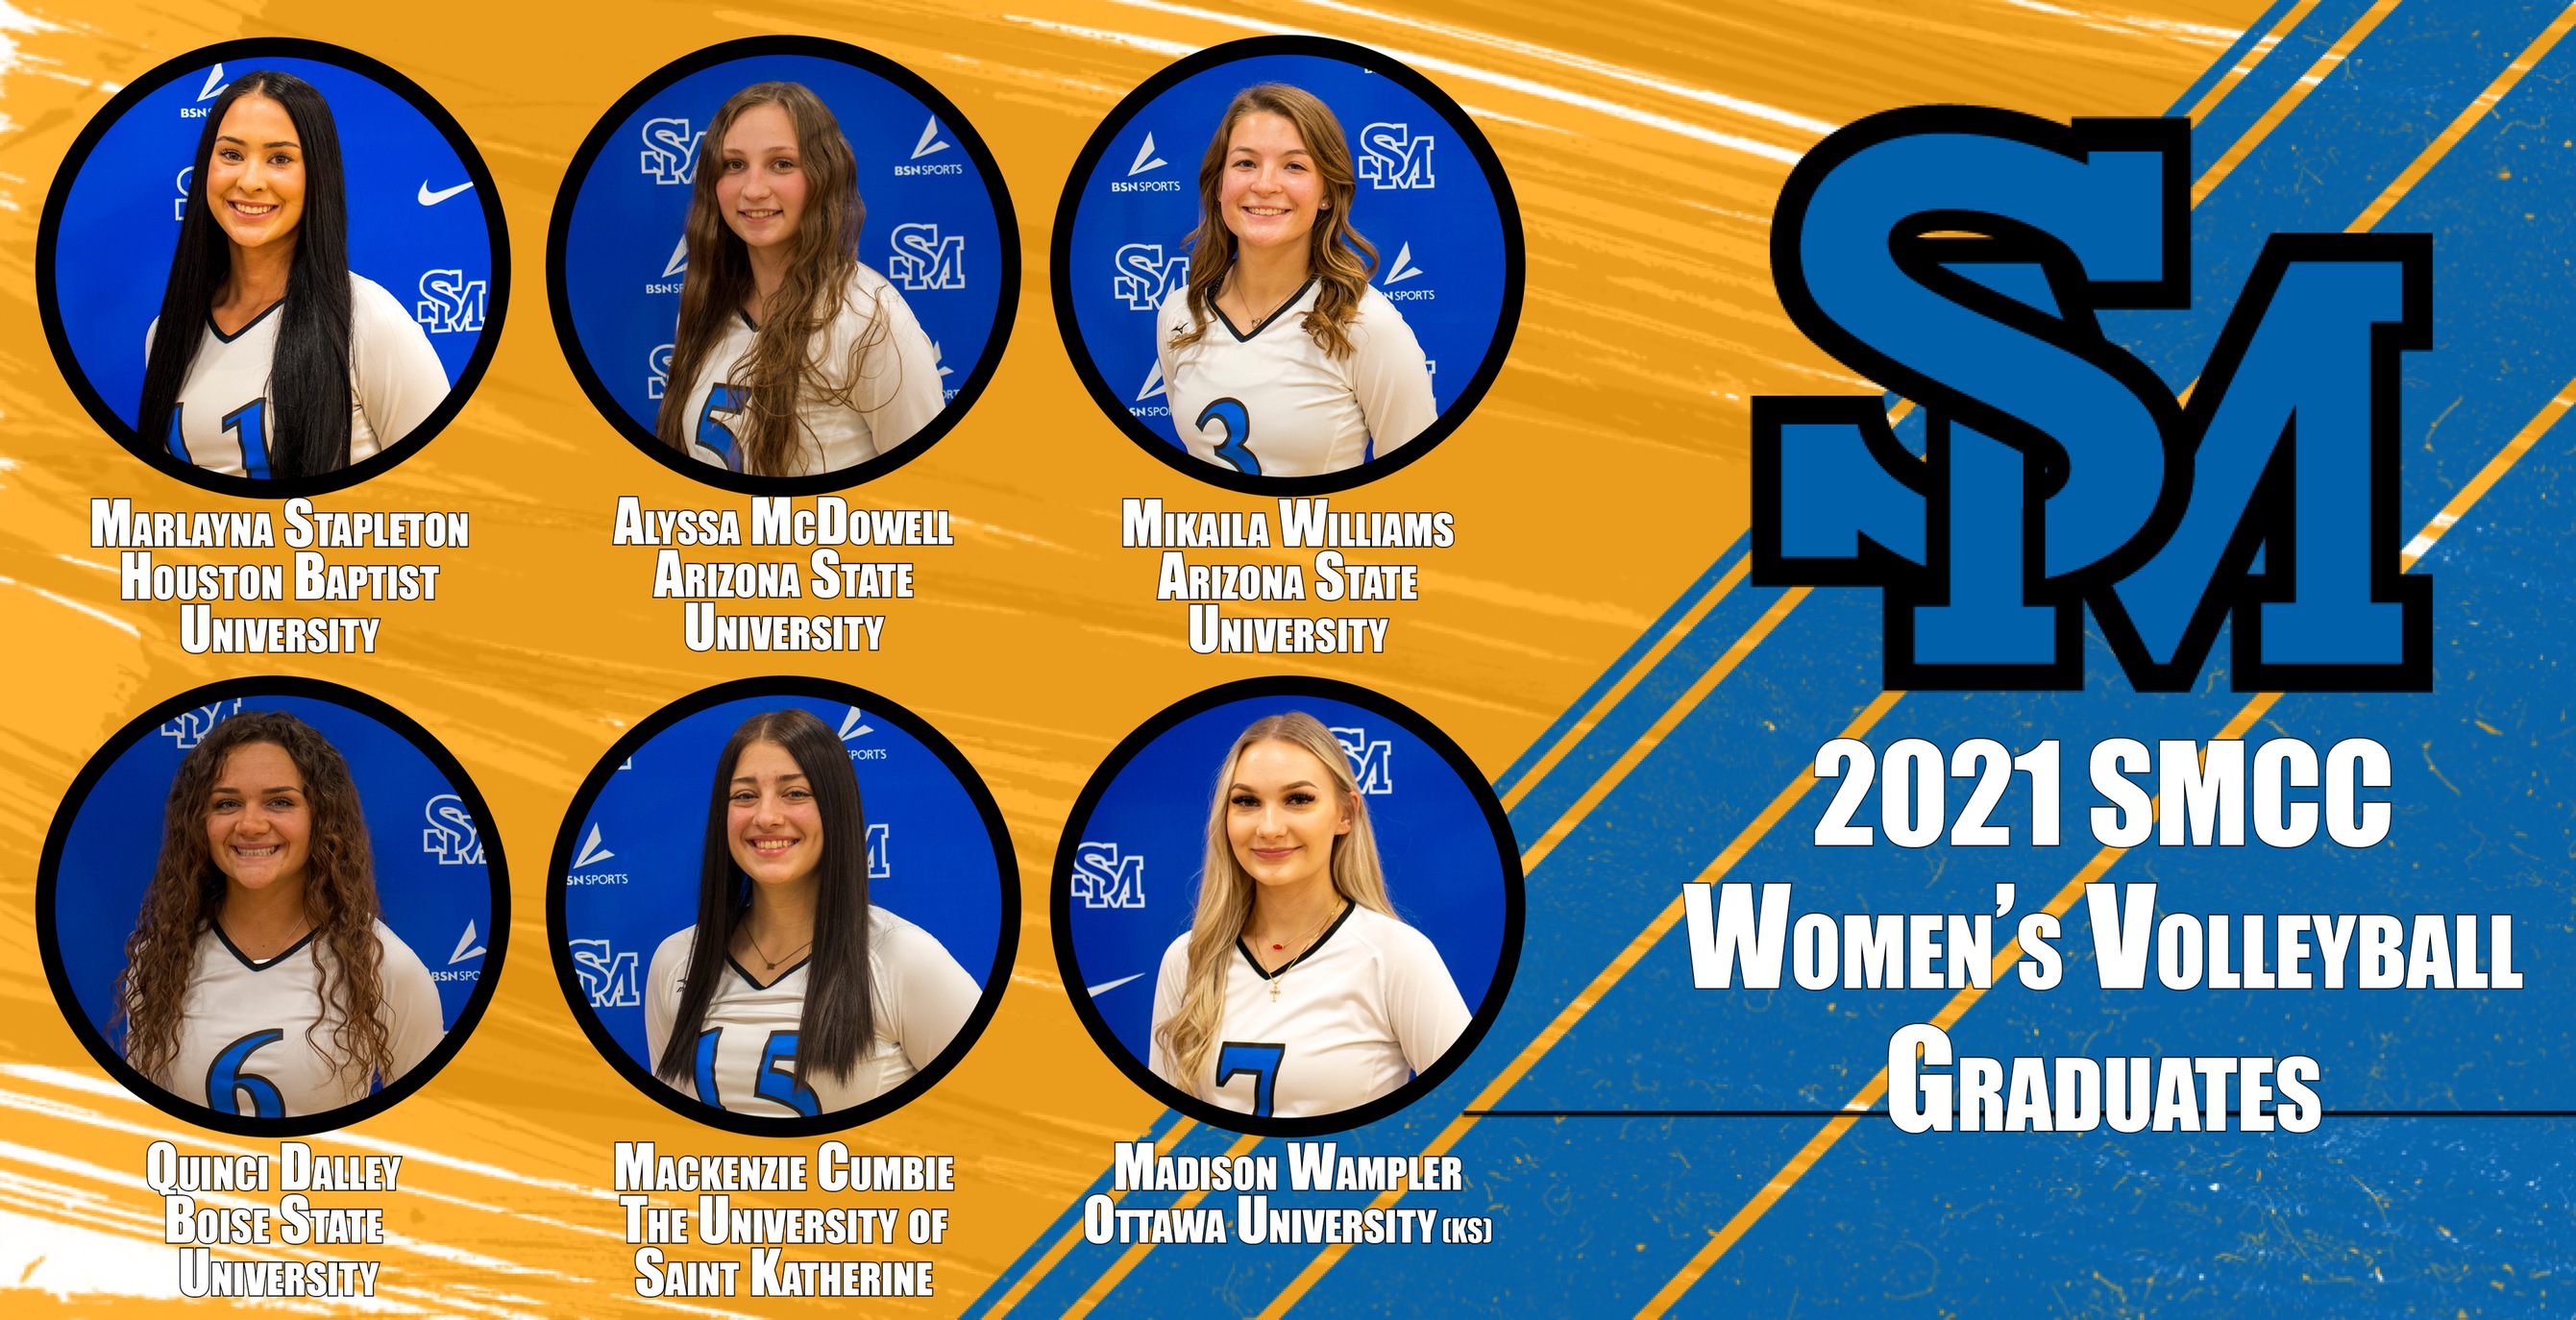 SMCC Women's Volleyball/Beach Volleyball Announce 2021 Transfers and Graduates